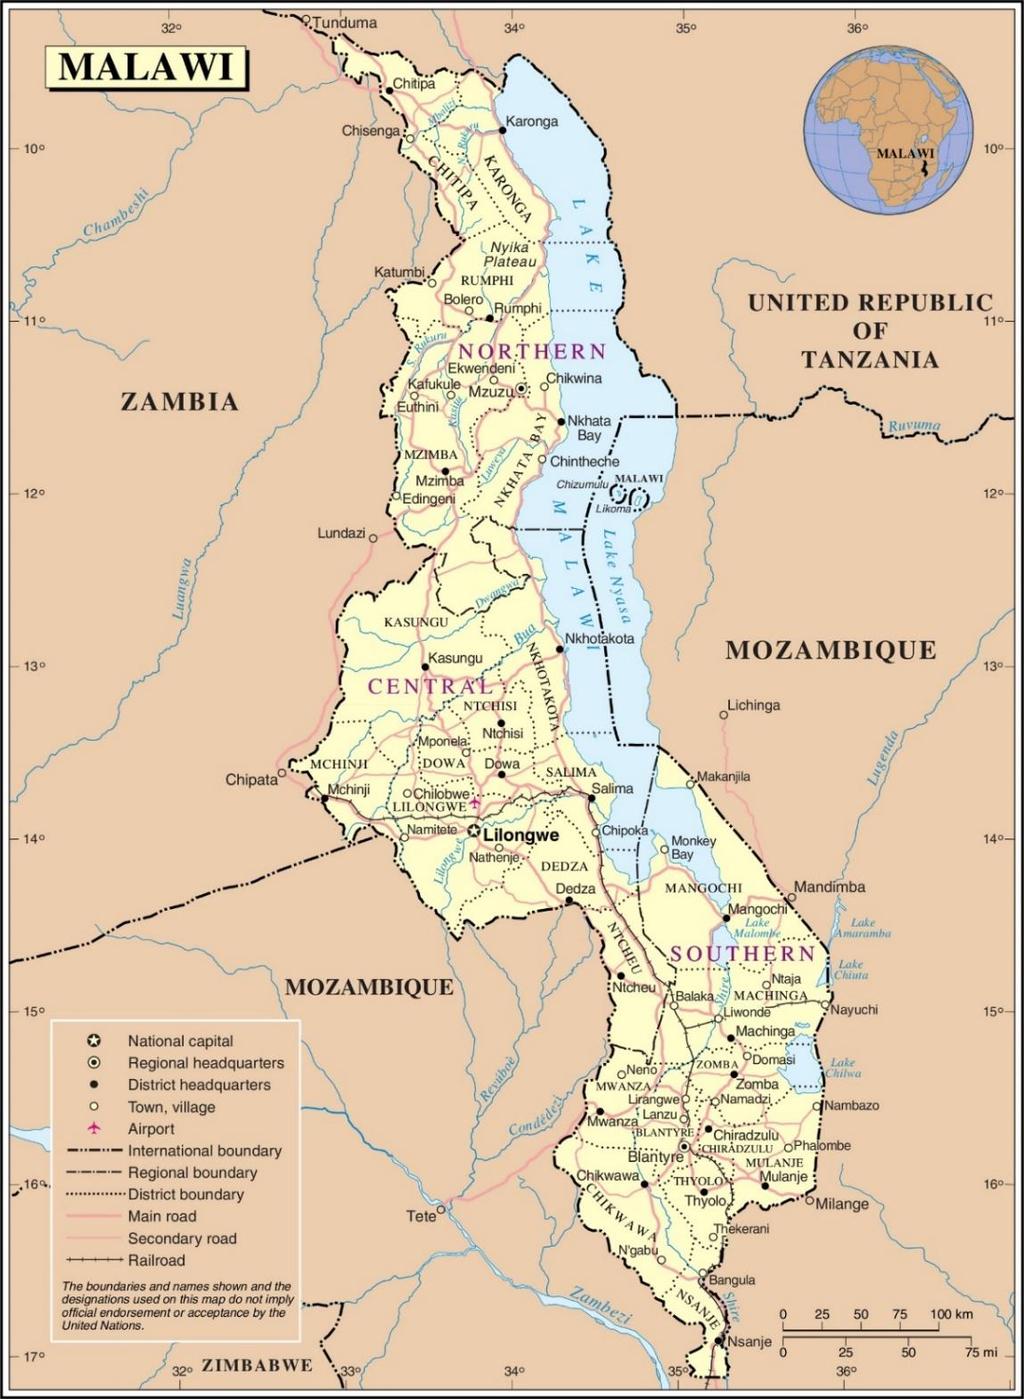 Appendix VII: Map of the Republic of Malawi showing Project Sites Disclaimer This map was provided by the African Development Bank exclusively for the use of the readers of the report to which it is